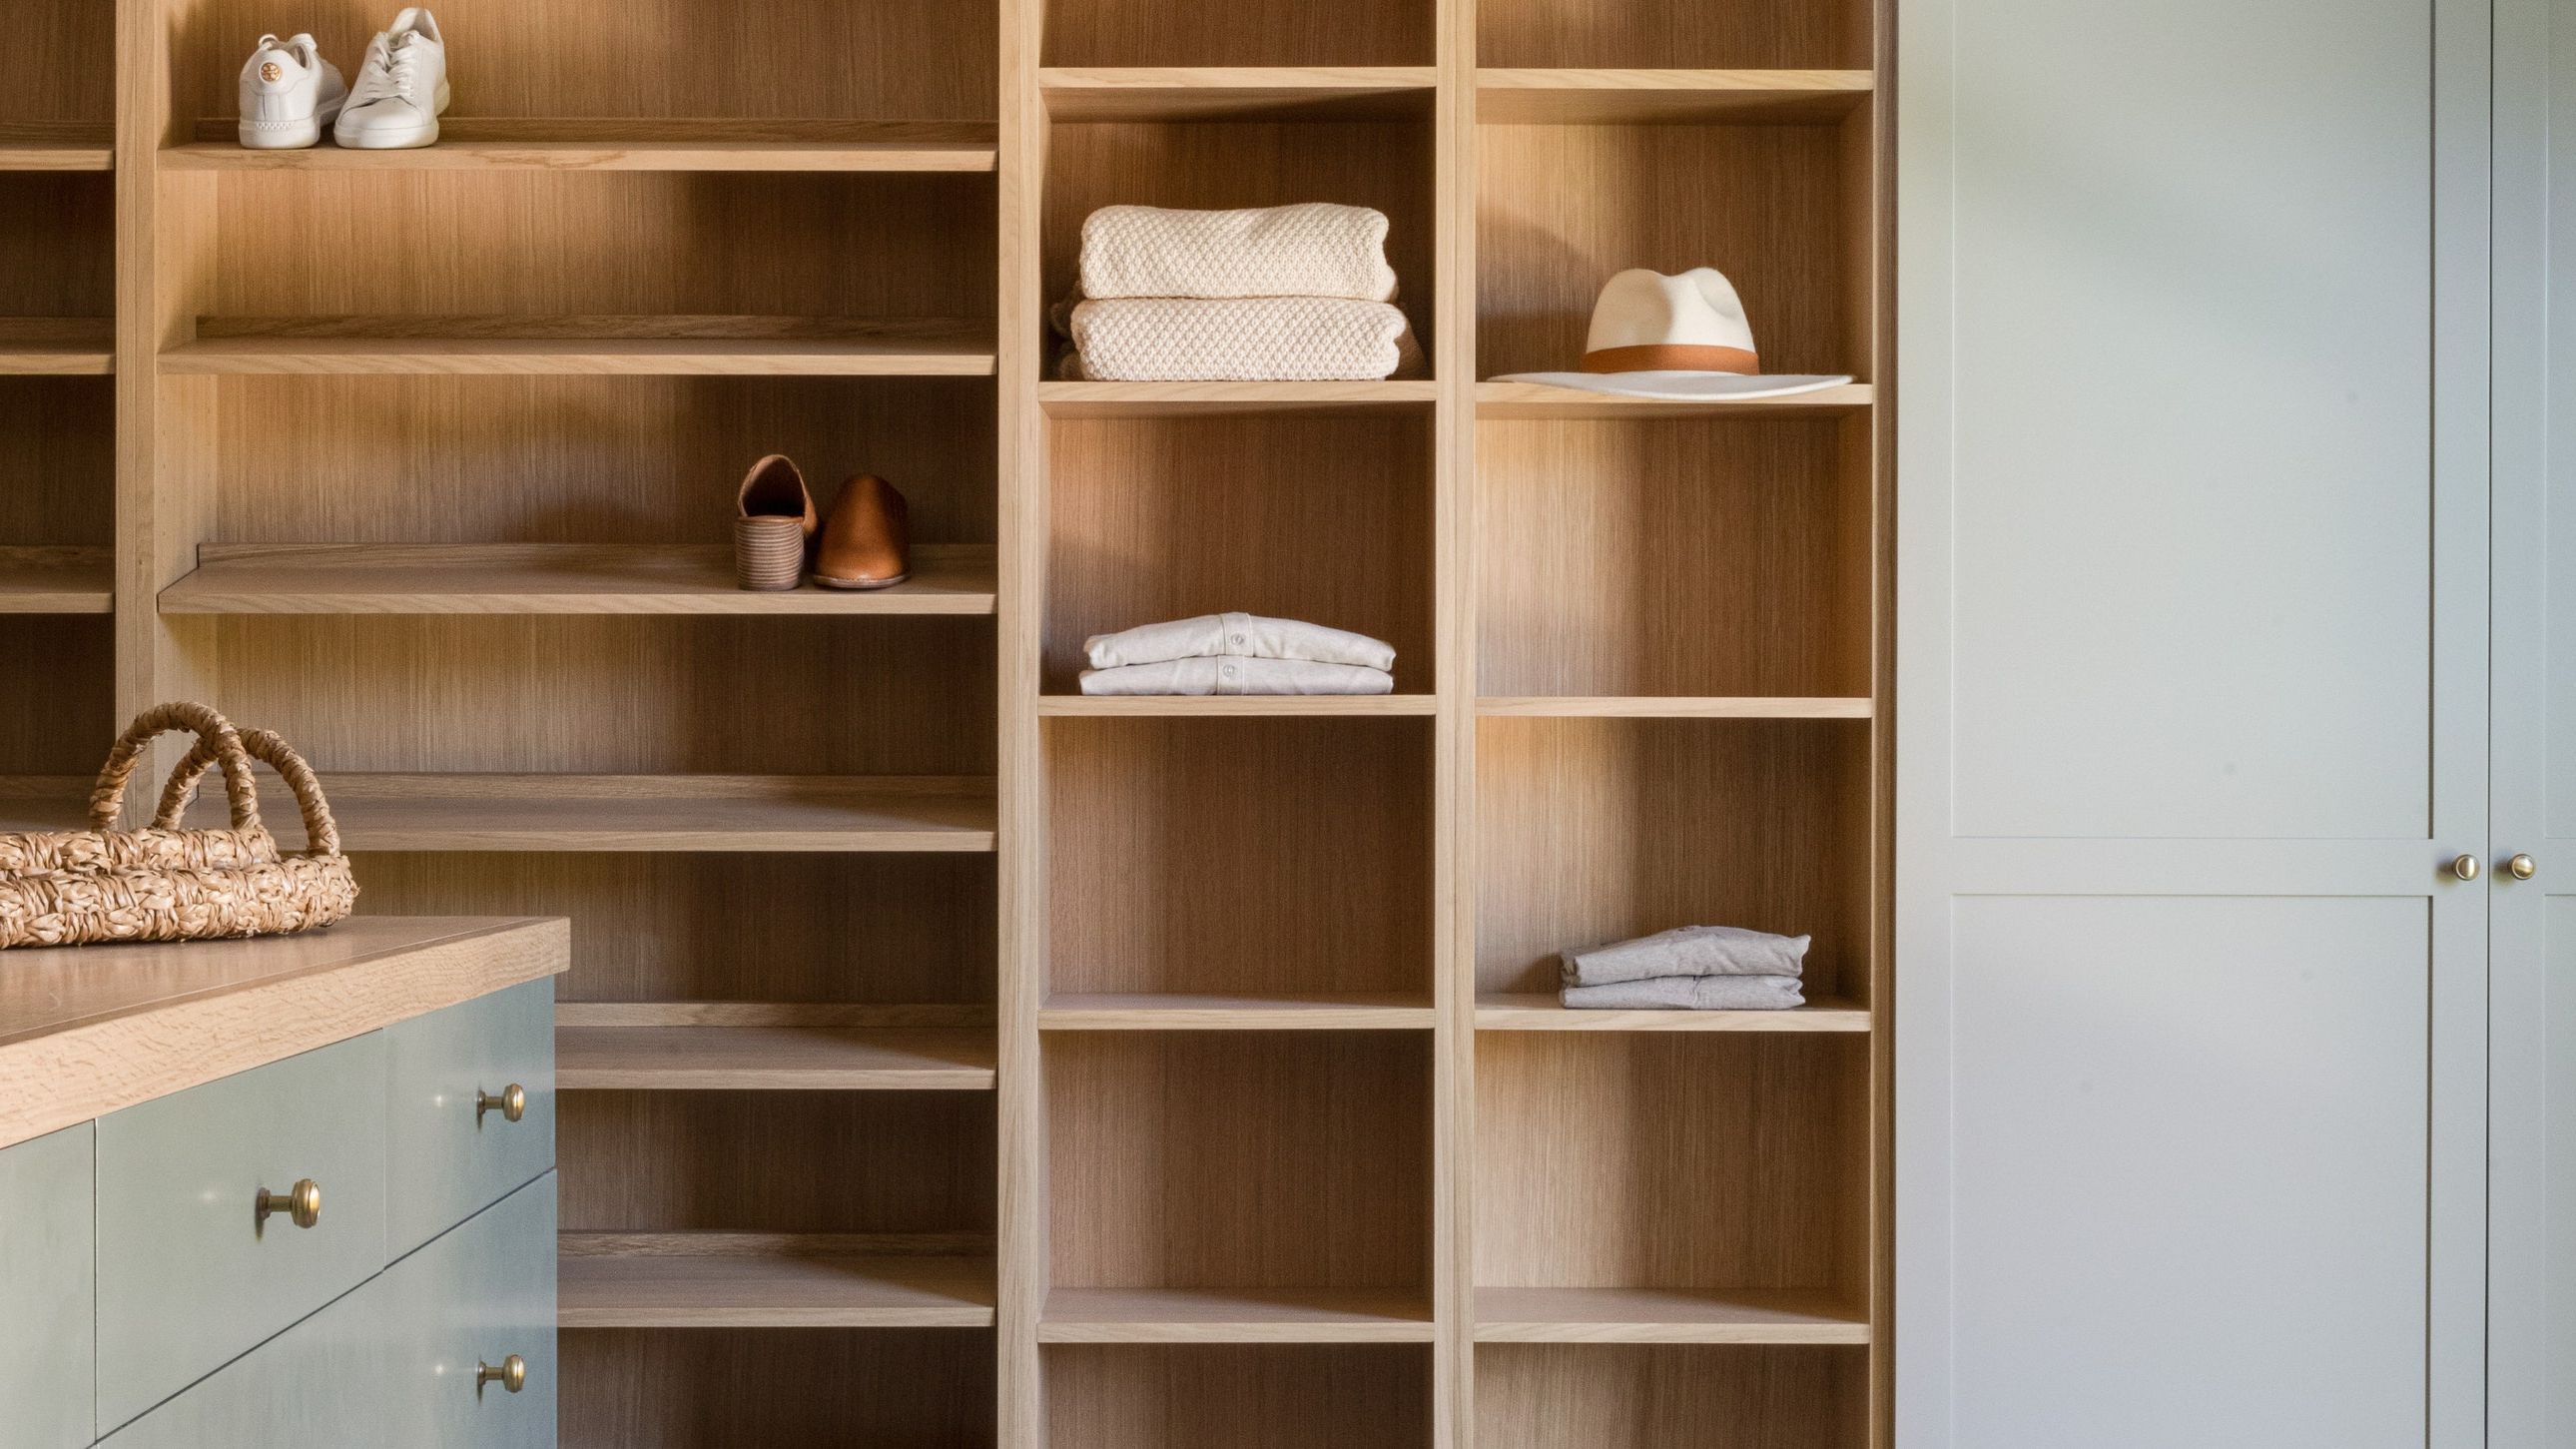 33 Best Closet Organization Ideas To Maximize Space And Style |  Architectural Digest | Architectural Digest With Regard To Drawers And Shelves For Wardrobes (Gallery 14 of 20)